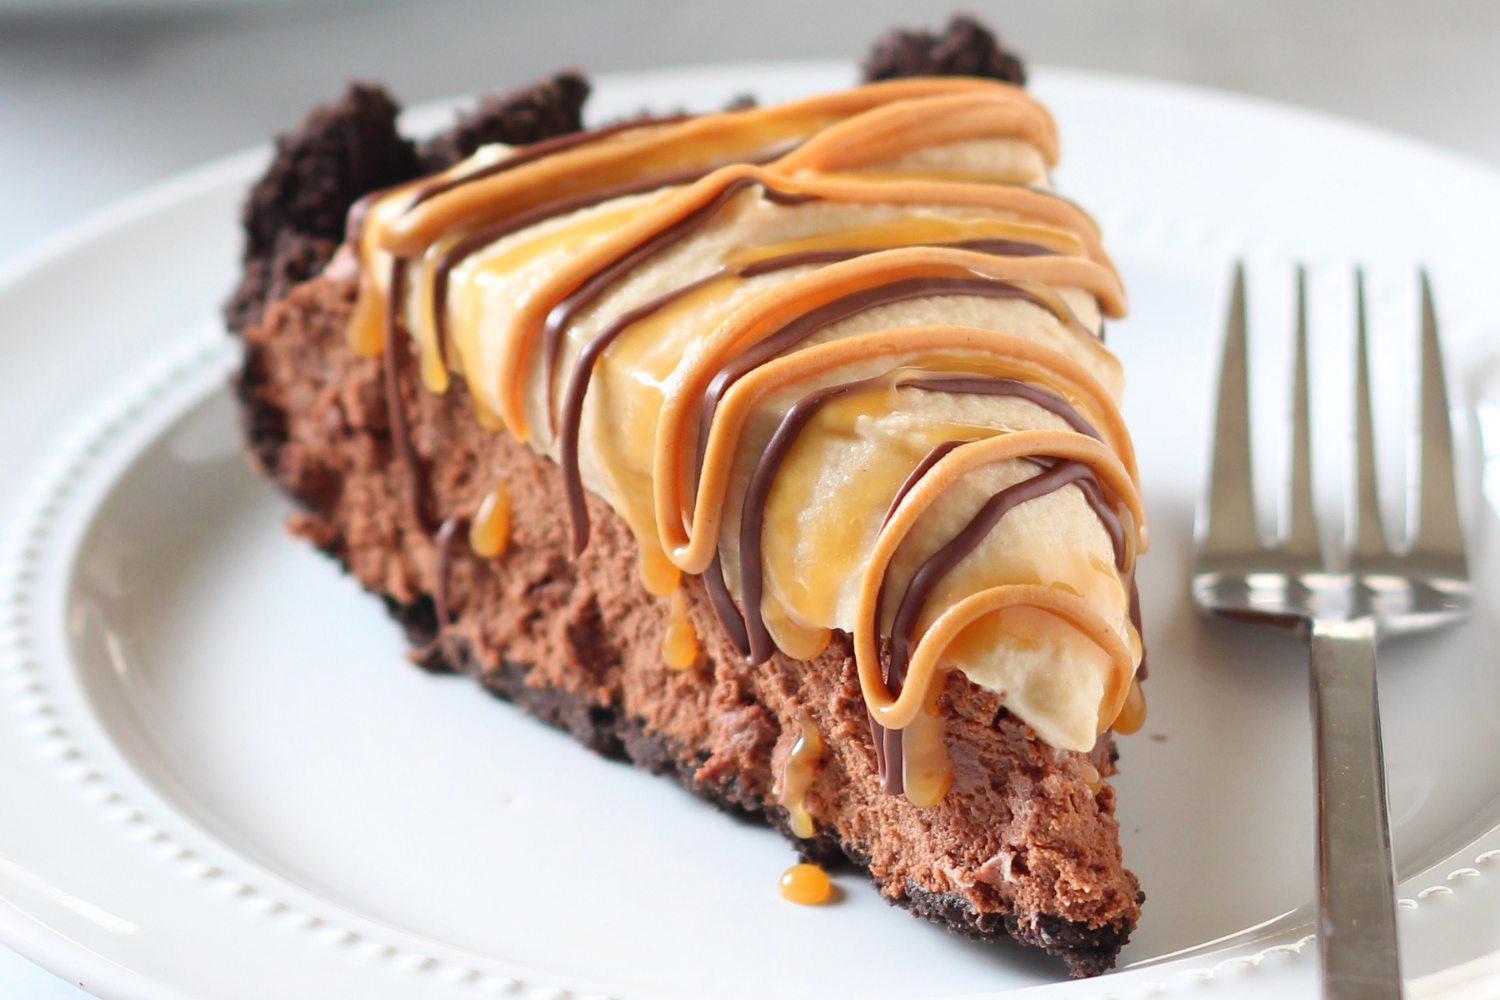 a slice of Chocolate Peanut Butter Caramel Mousse Pie with drizzled peanut butter, caramel and melted chocolate on top, ready to serve